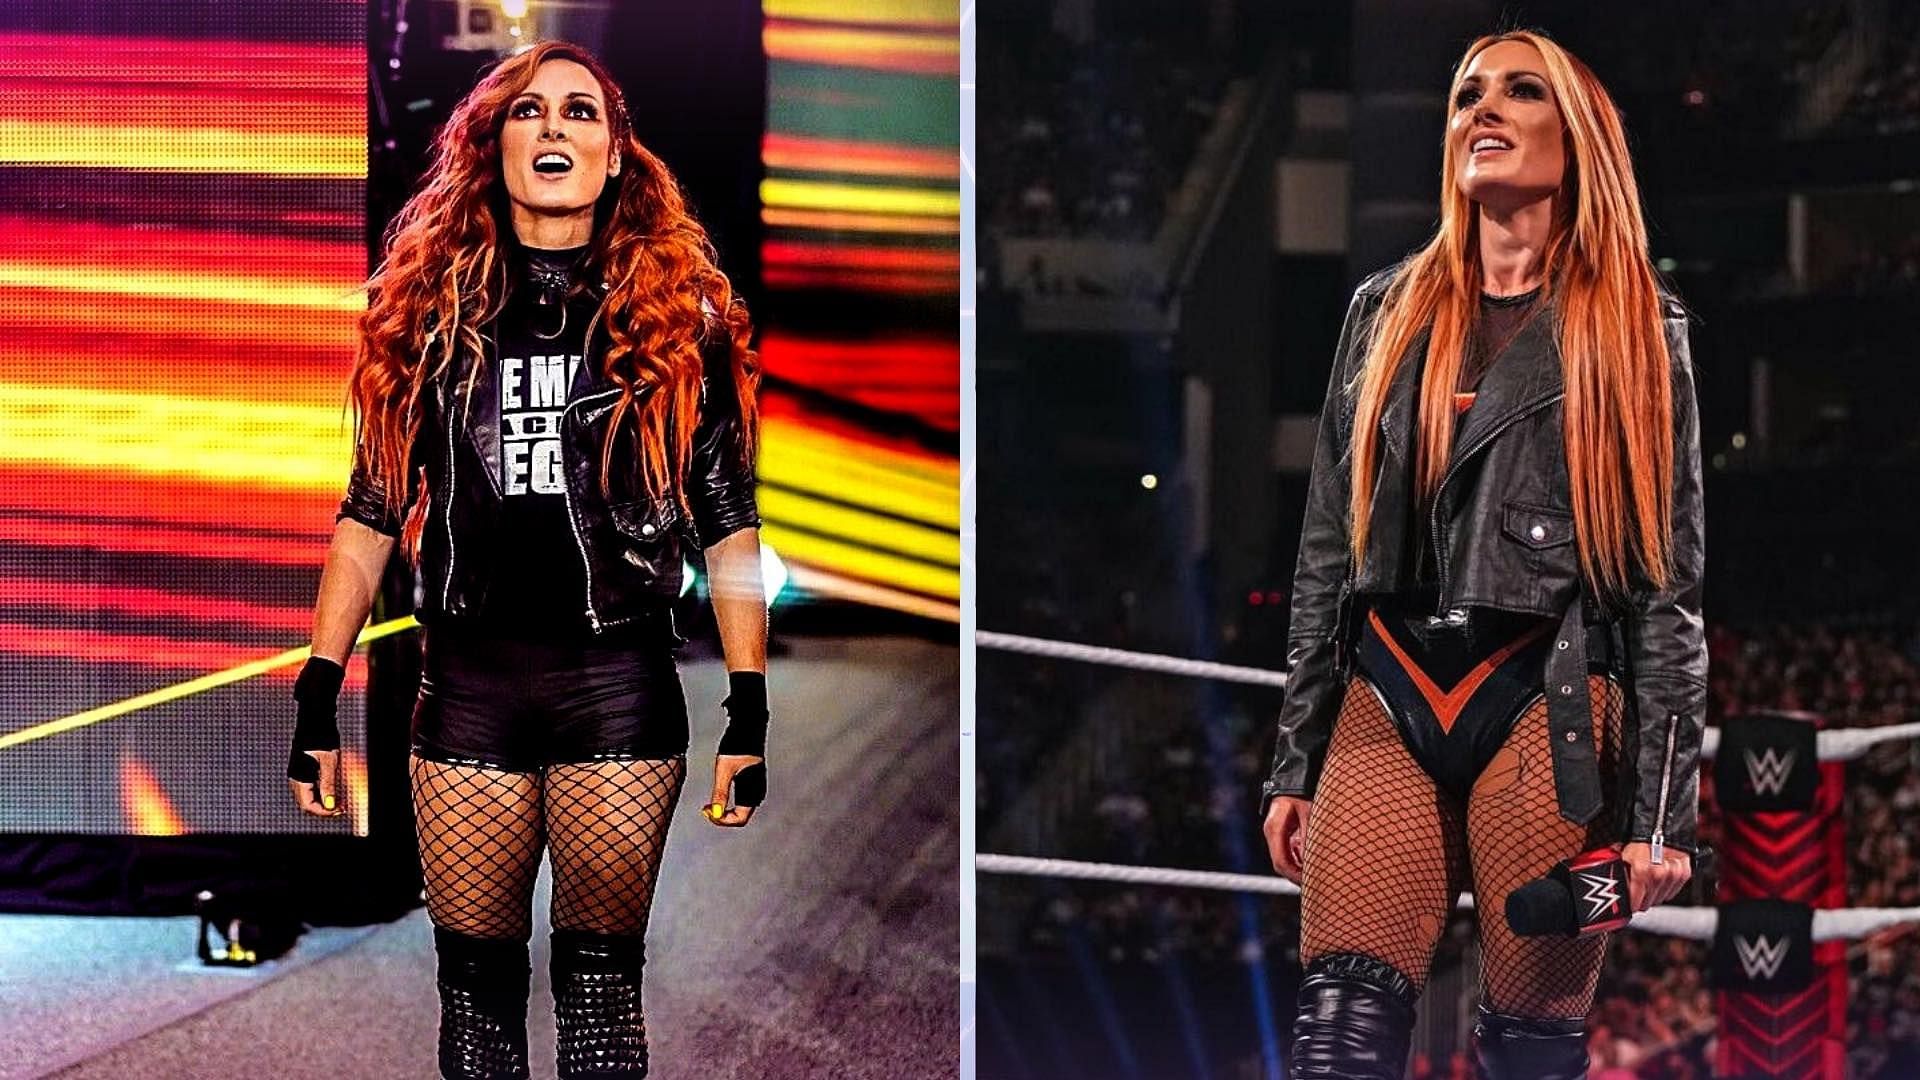 Becky Lynch has seemingly helped bring several WWE stars back to TV